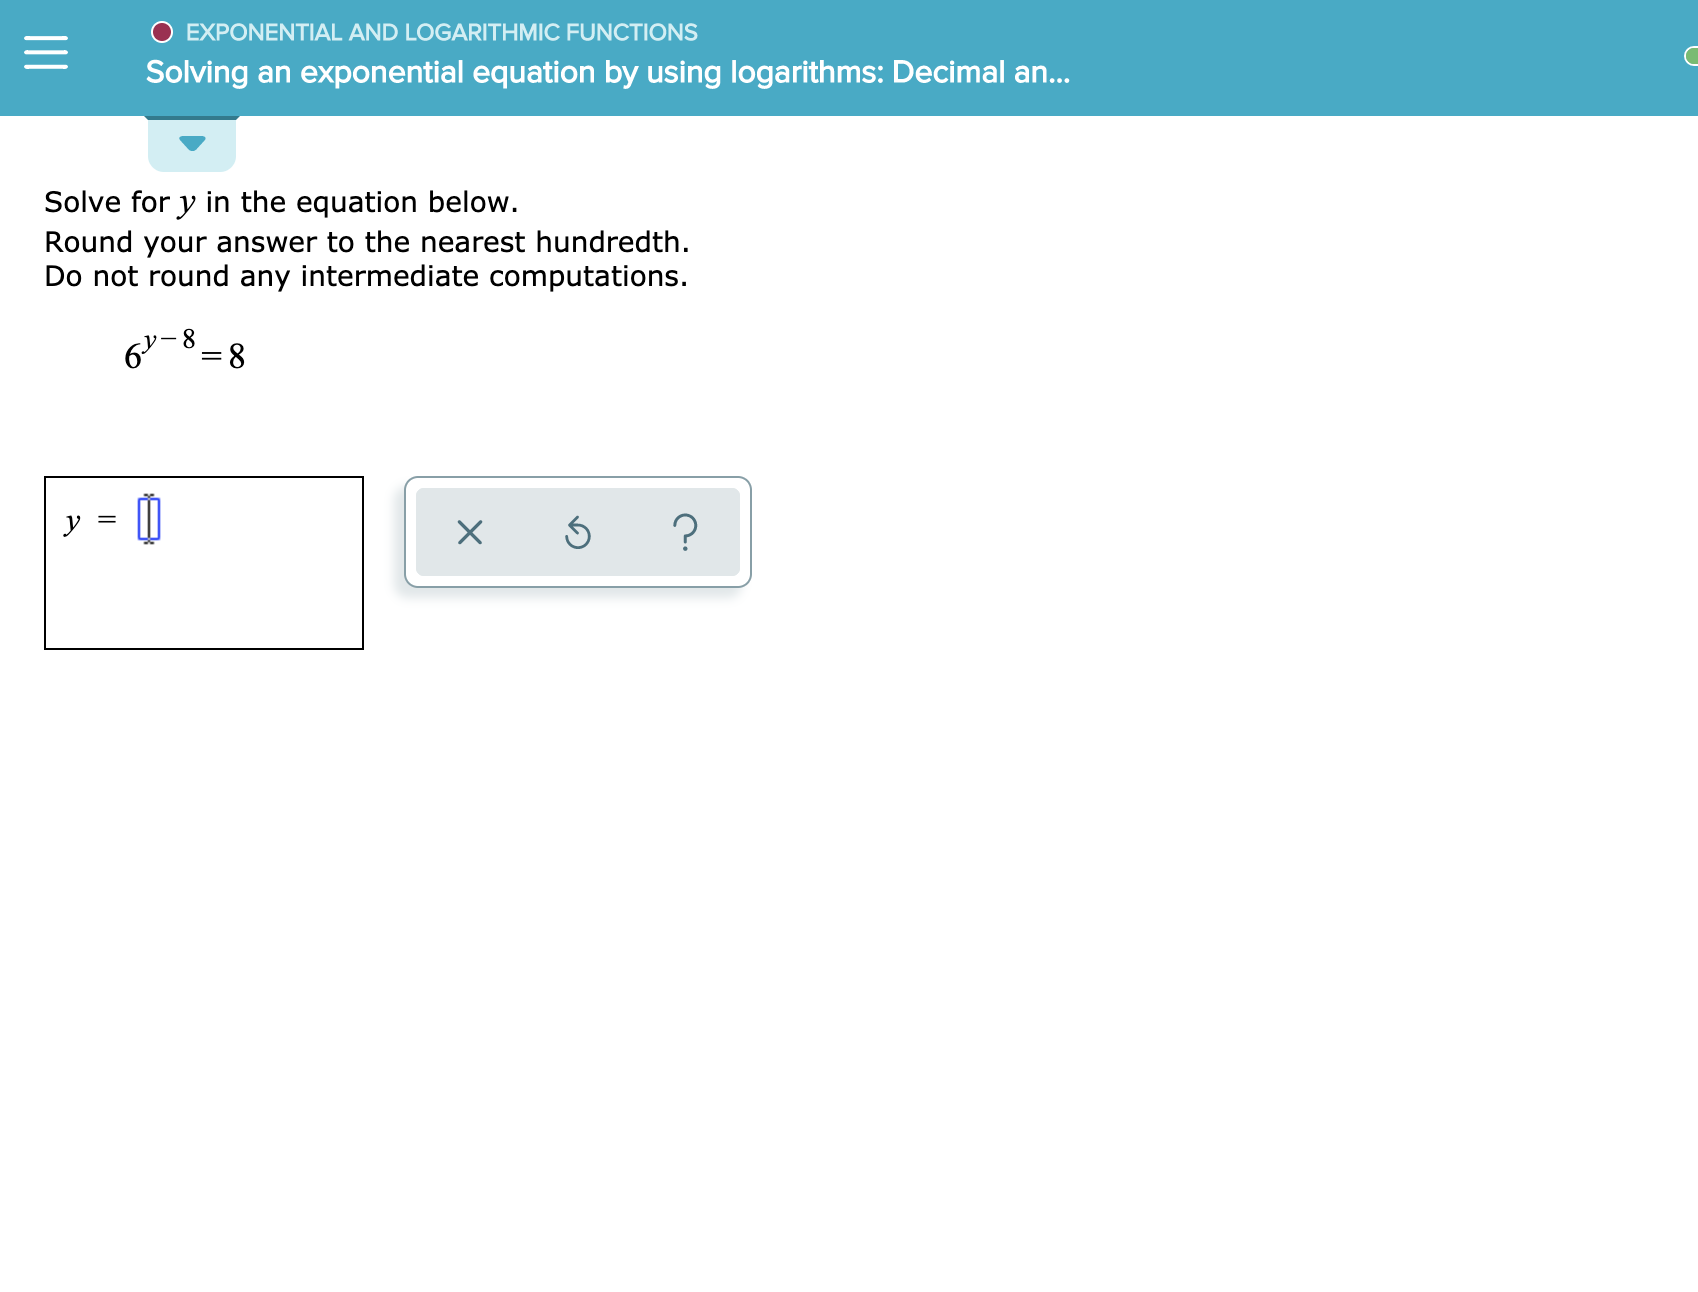 O EXPONENTIAL AND LOGARITHMIC FUNCTIONS
Solving an exponential equation by using logarithms: Decimal an...
Solve for y in the equation below.
Round your answer to the nearest hundredth
Do not round any intermediate computations.
6 8
?
X
